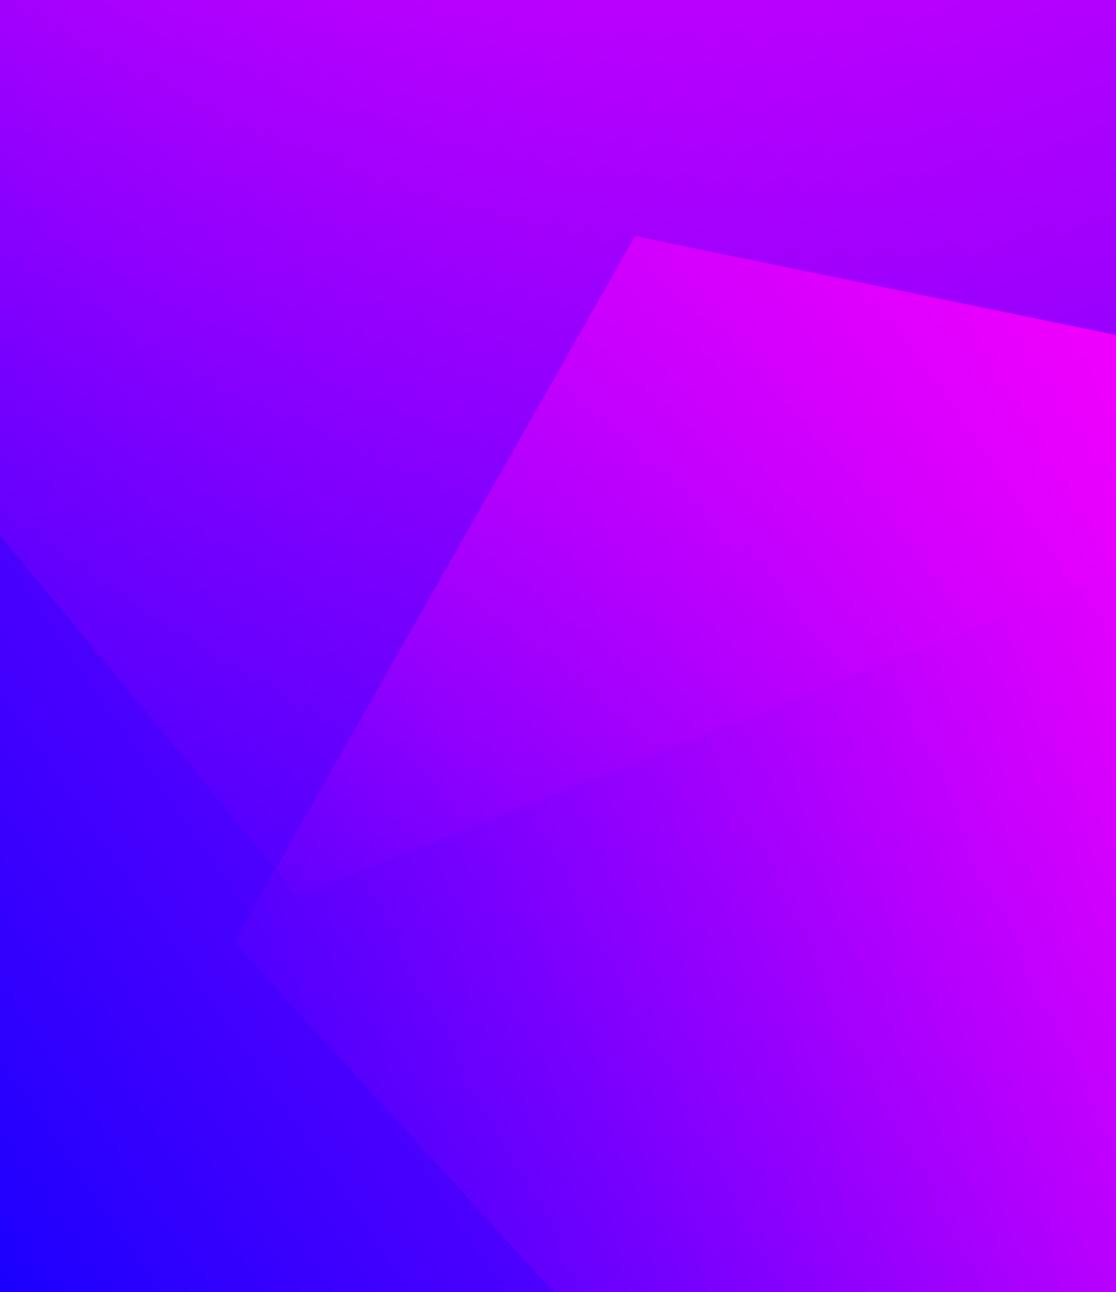 A digital wallpaper comprised of layered oversized pentagons, resulting in a wallpaper that graduates from dark blue to light purple.